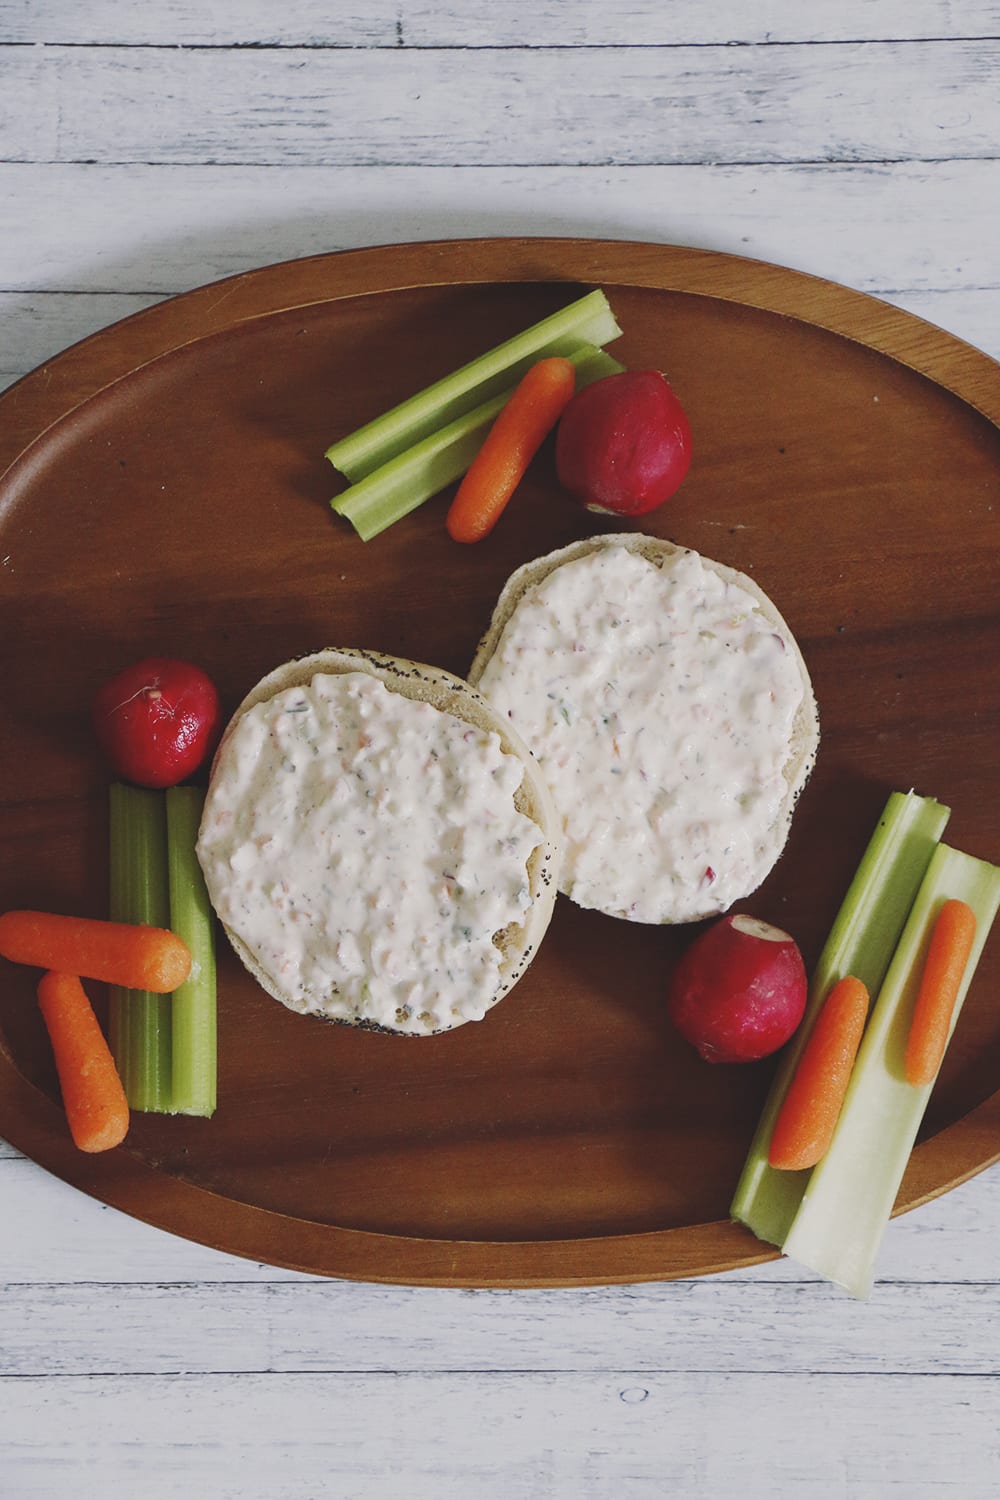 This garden veggie cream cheese recipe is a great way to use your garden vegetables! Use it as dip or spread it on a bagel for a veggie-packed smear!